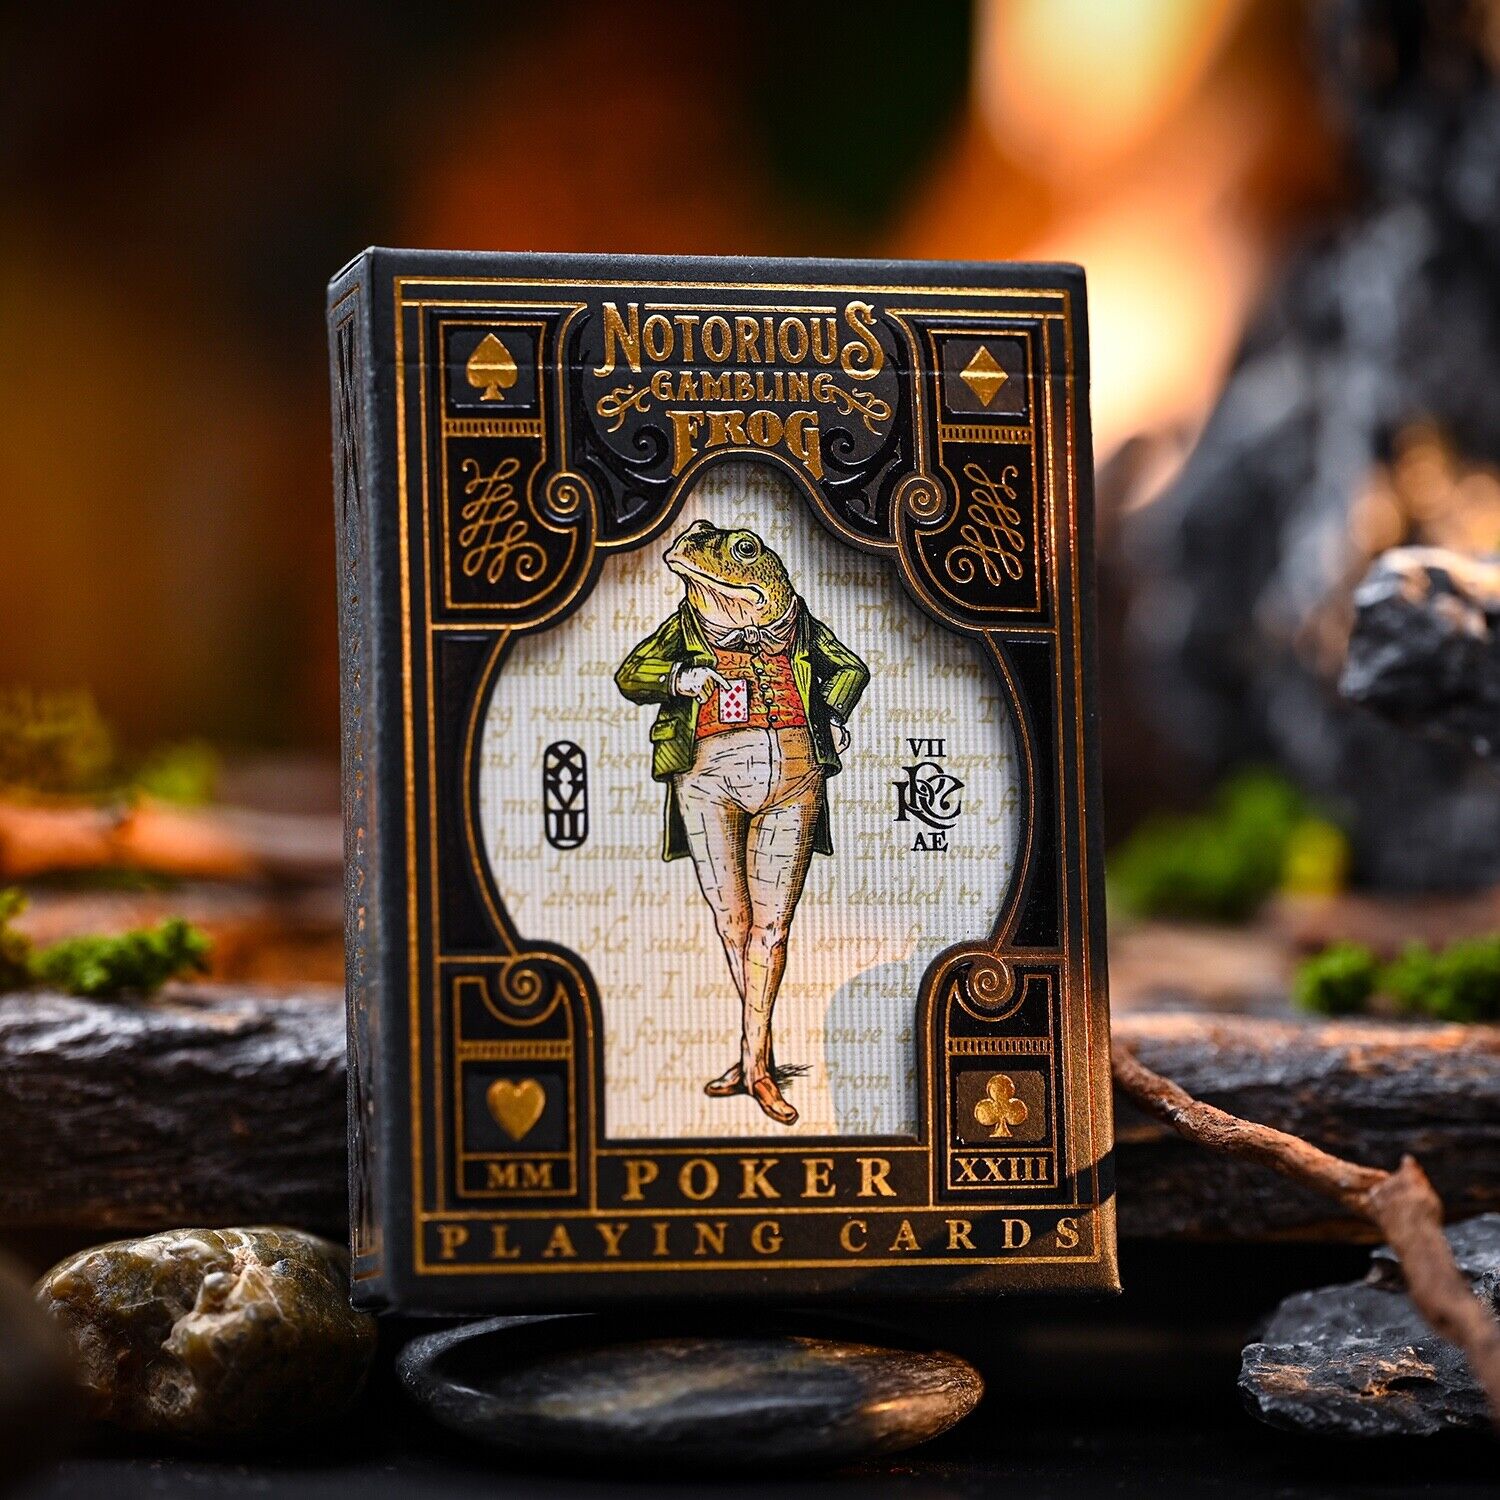 Notorious Gambling Frog Playing Cards - Golden Edition Rare Playing Cards